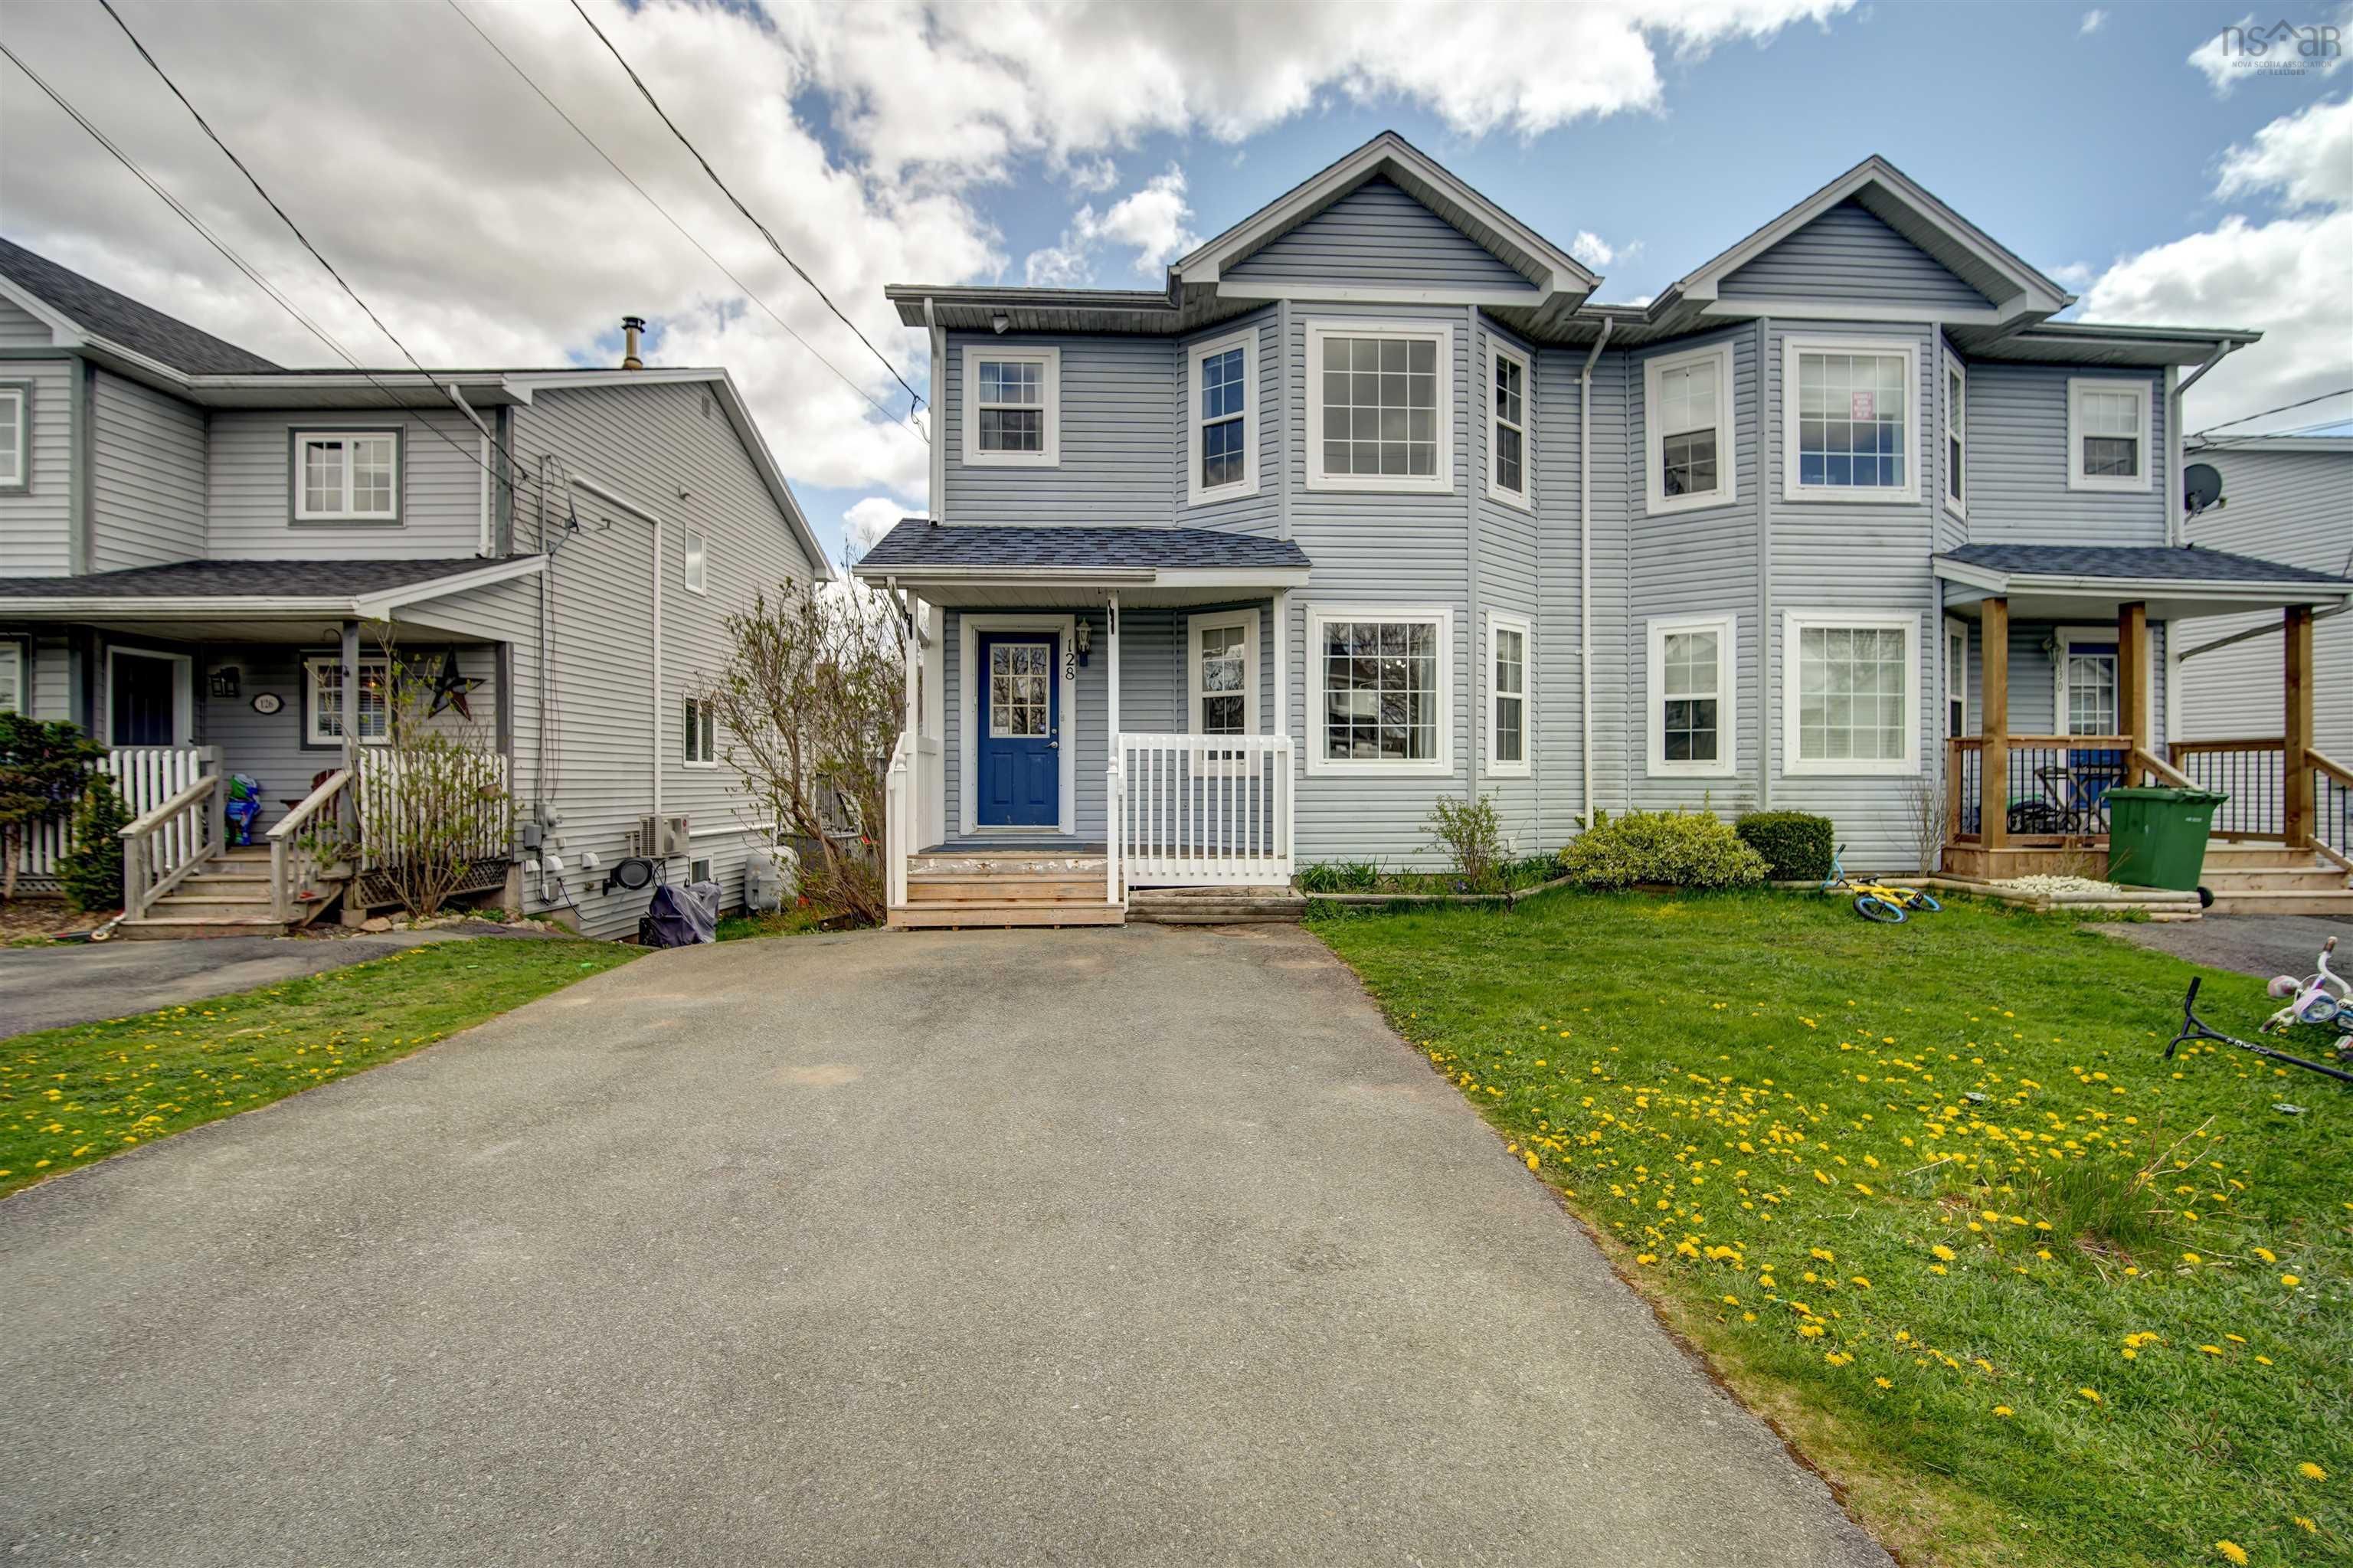 Main Photo: 128 Brentwood Avenue in Timberlea: 40-Timberlea, Prospect, St. Marg Residential for sale (Halifax-Dartmouth)  : MLS®# 202309506